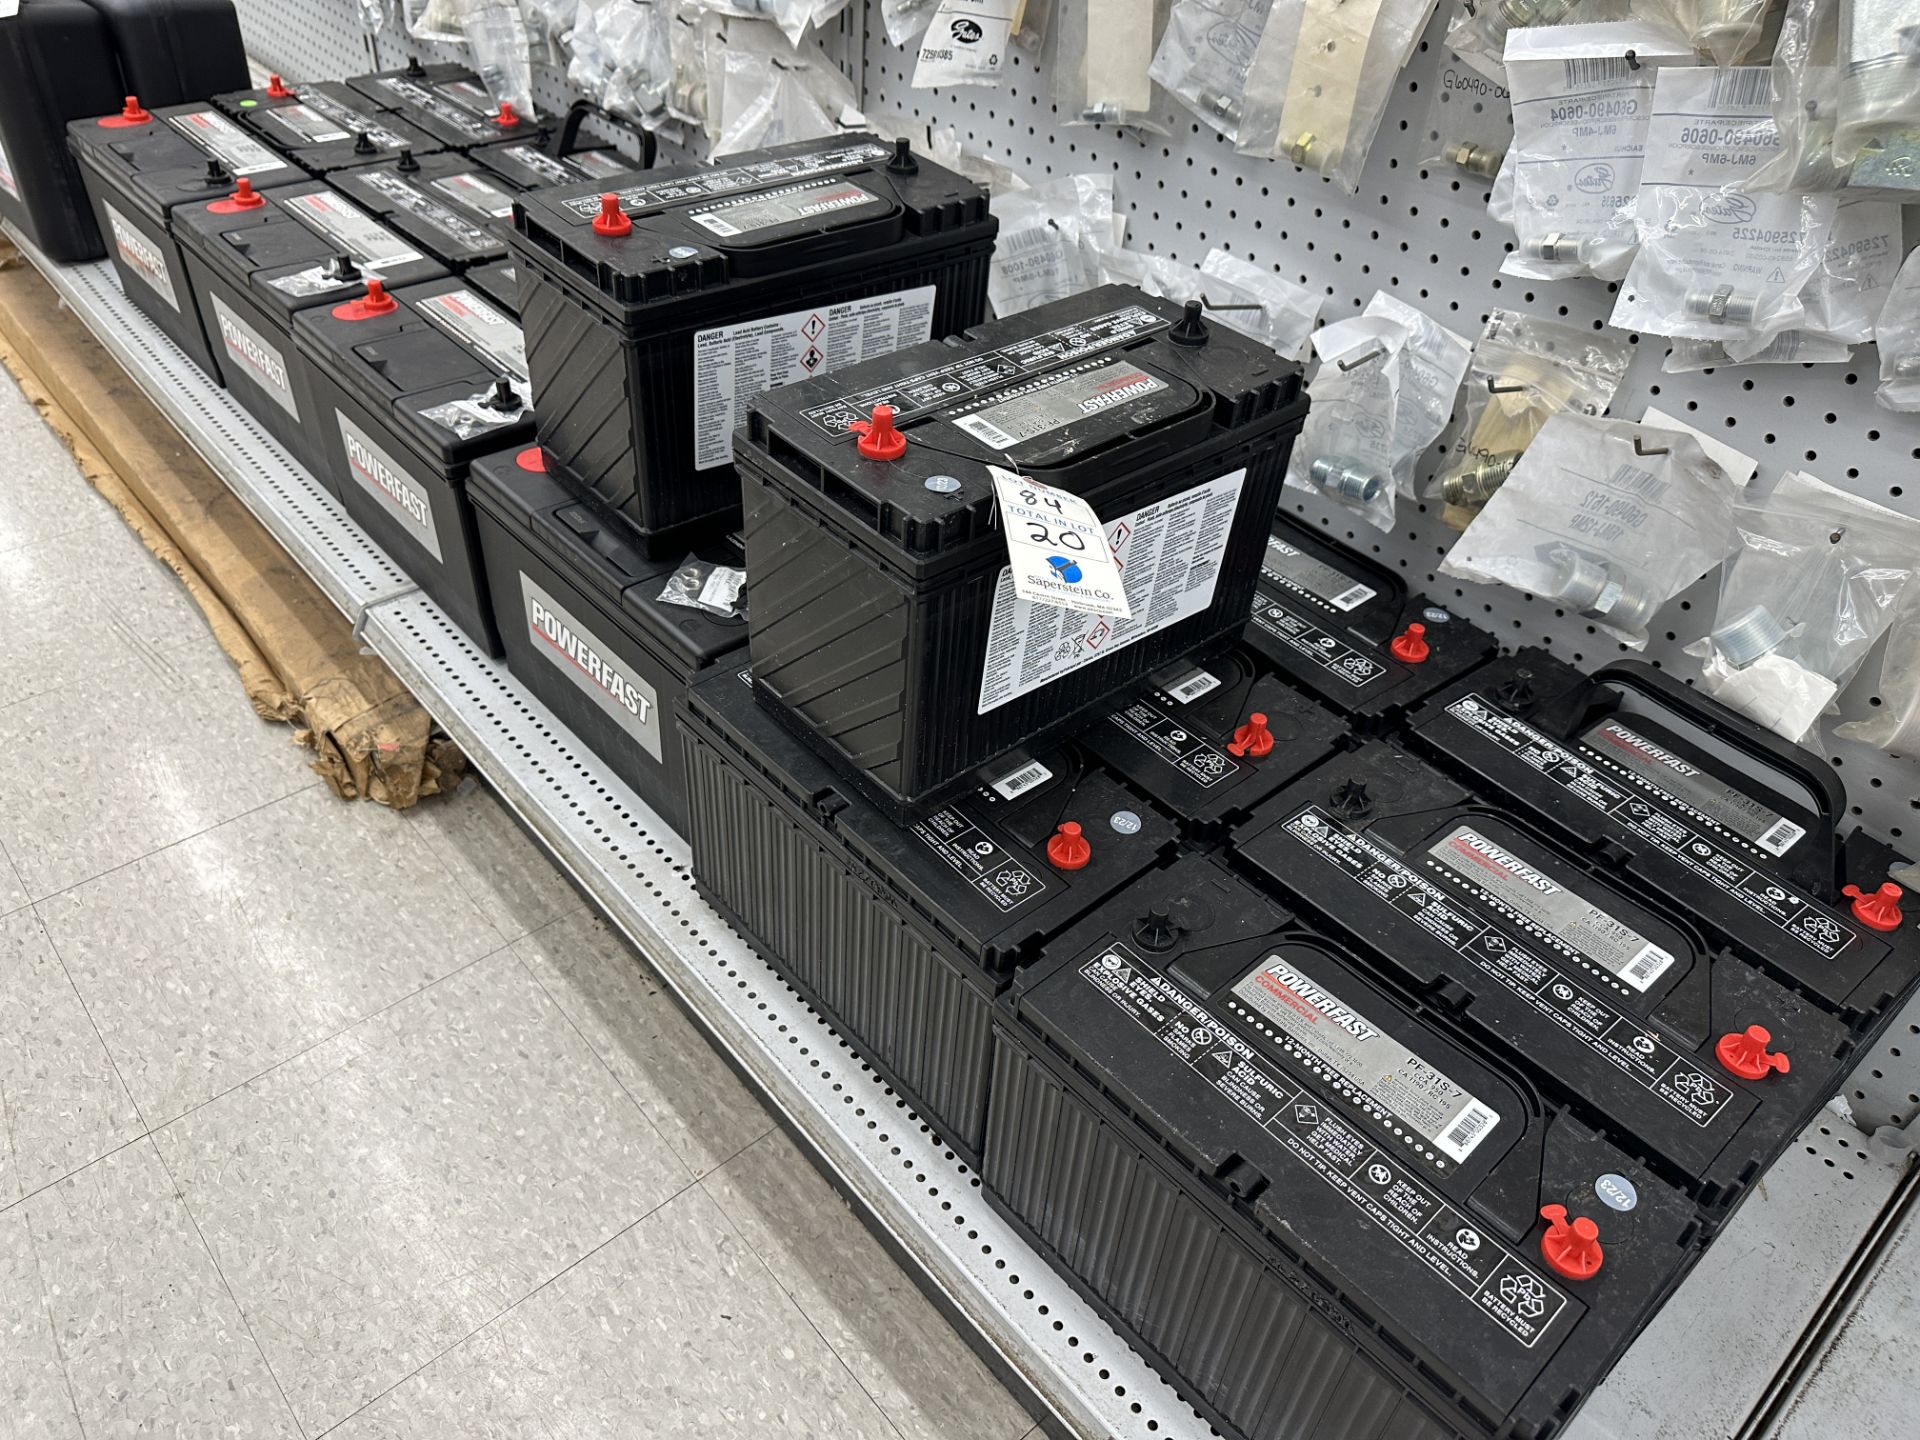 (20) Powerfast Group 31S, Industrial/Commercial 12V Batteries, 1000 Cranking Amps (BEING SOLD BY THE